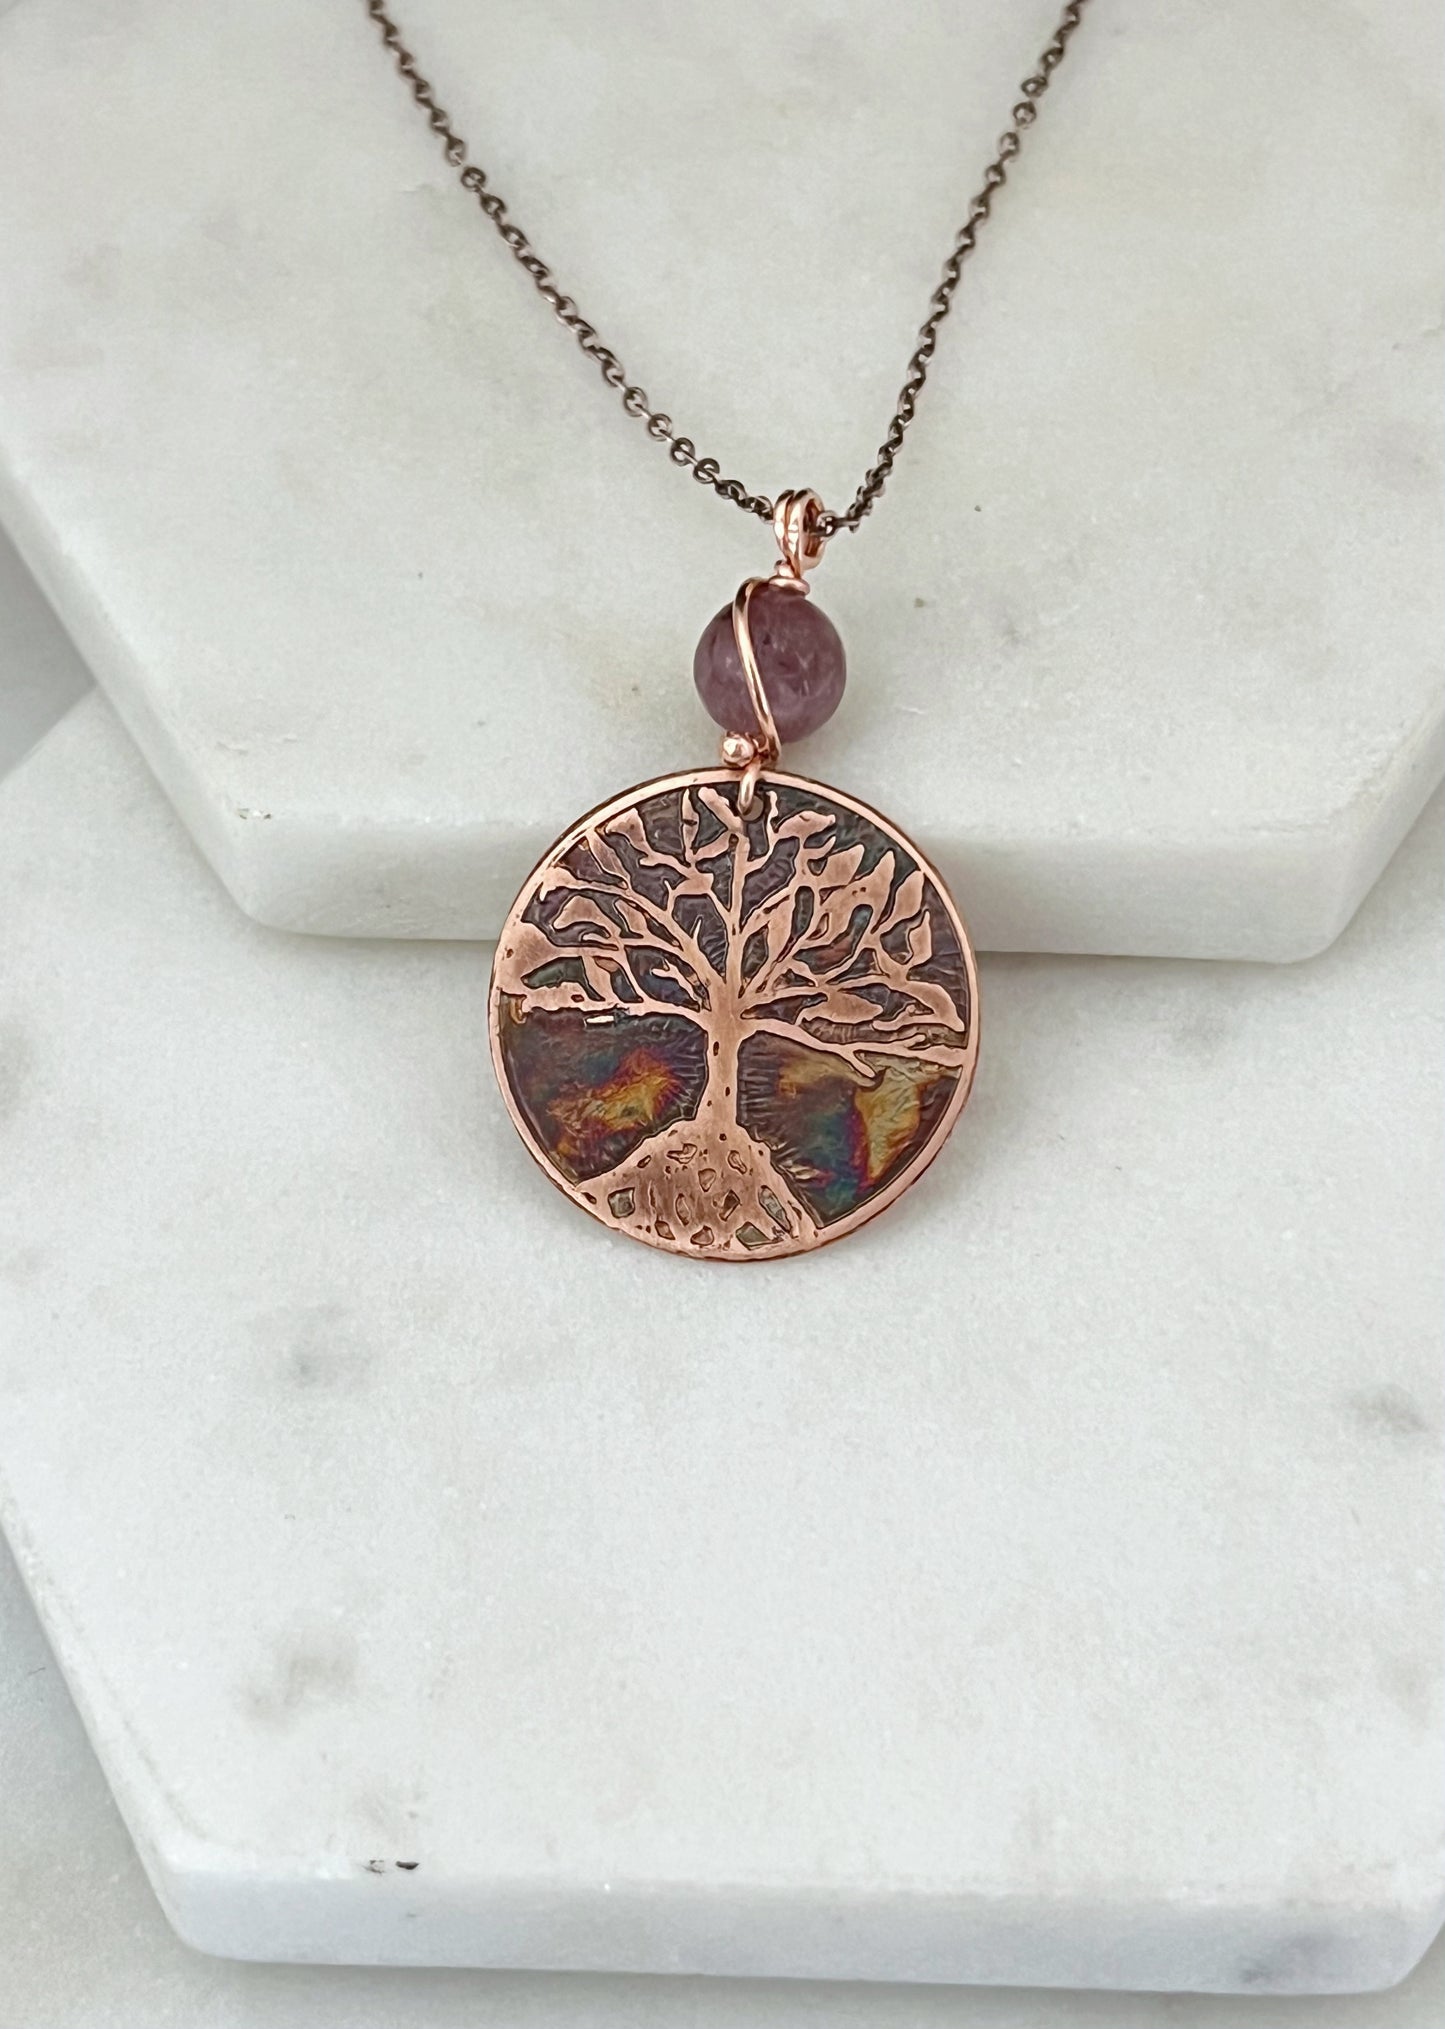 Acid etched copper tree necklace with lepidolite gemstone